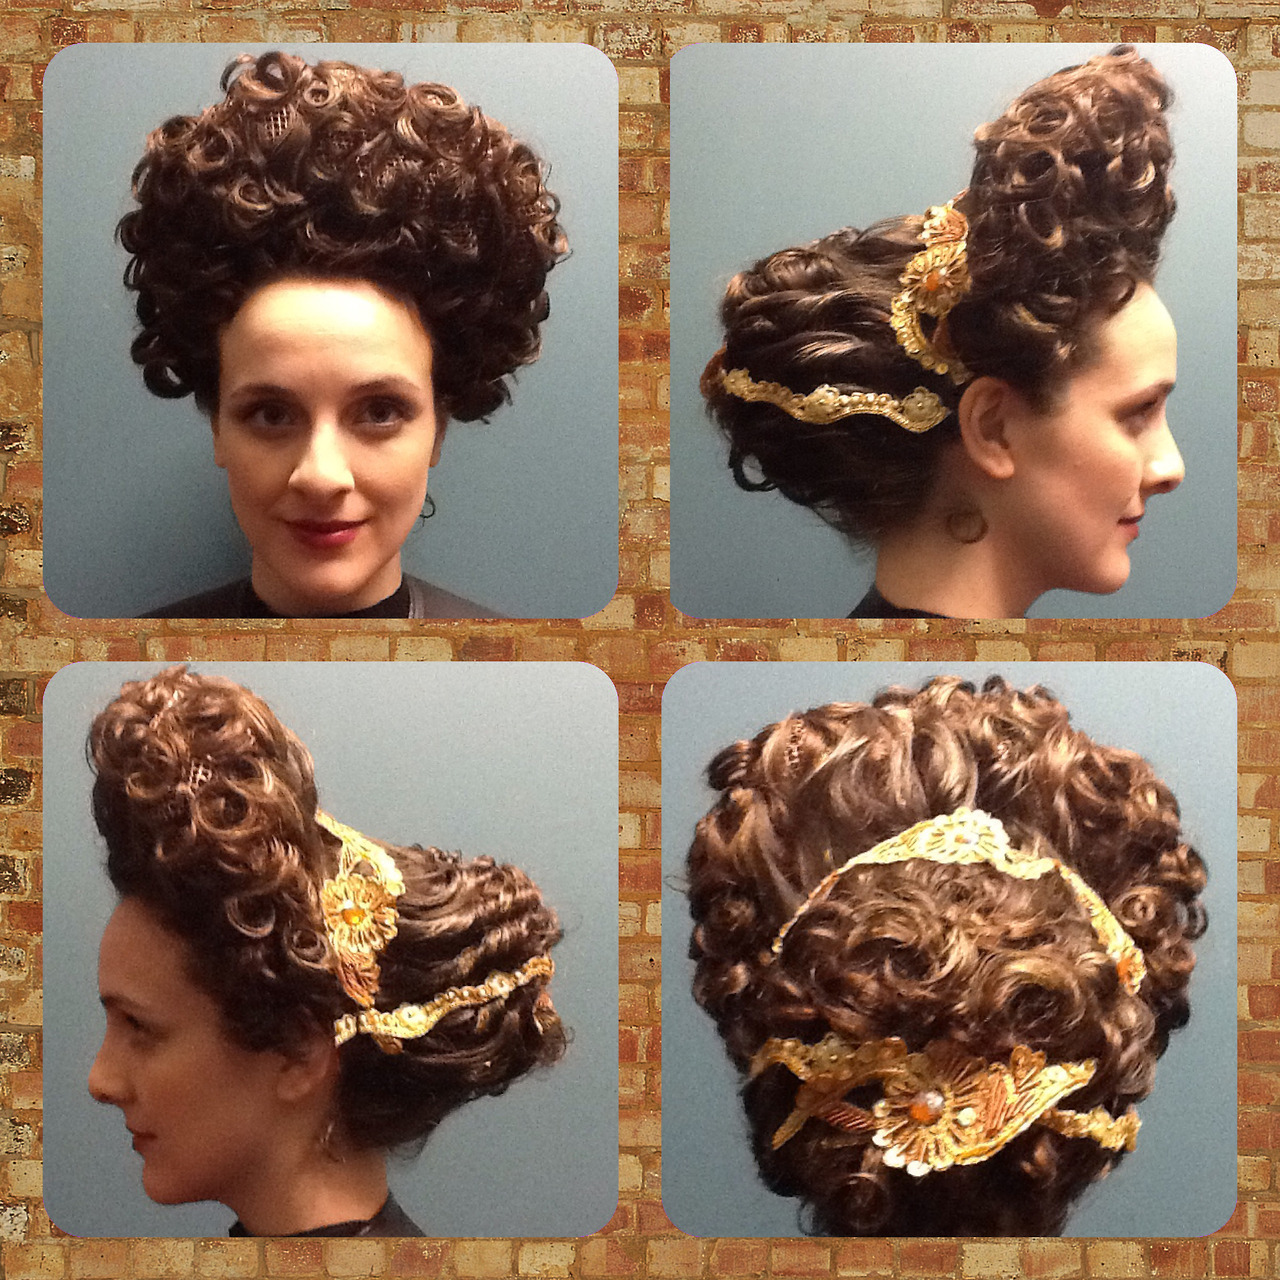 A Hairstyle Archaeologist Is Recreating Ancient Updos